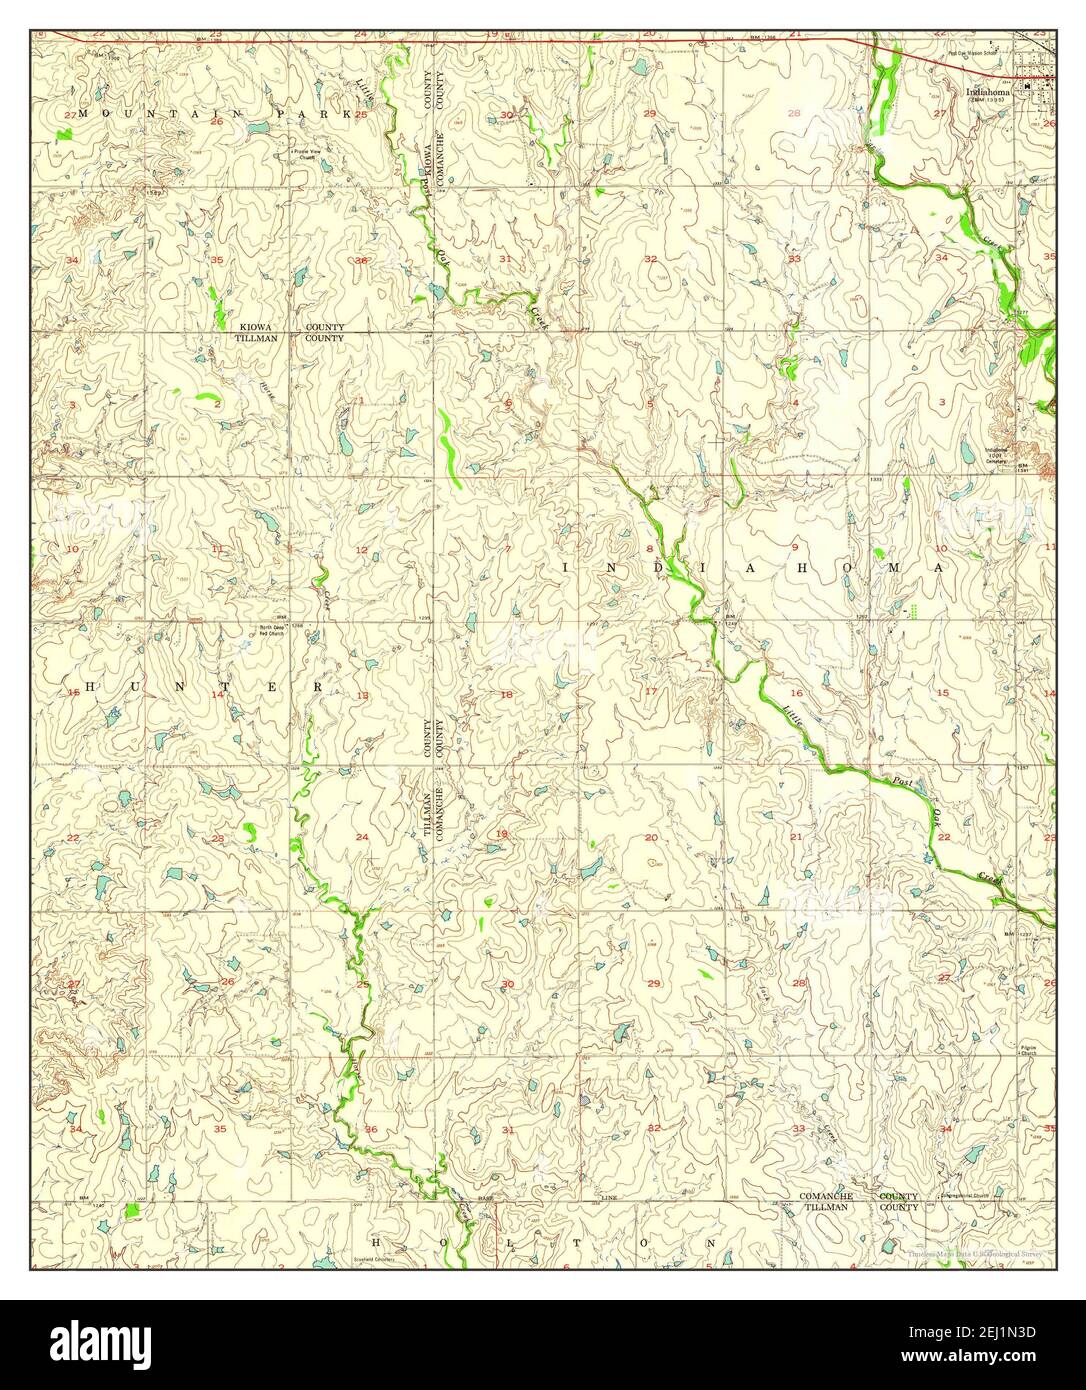 Indiahoma, Oklahoma, map 1956, 1:24000, United States of America by Timeless Maps, data U.S. Geological Survey Foto Stock